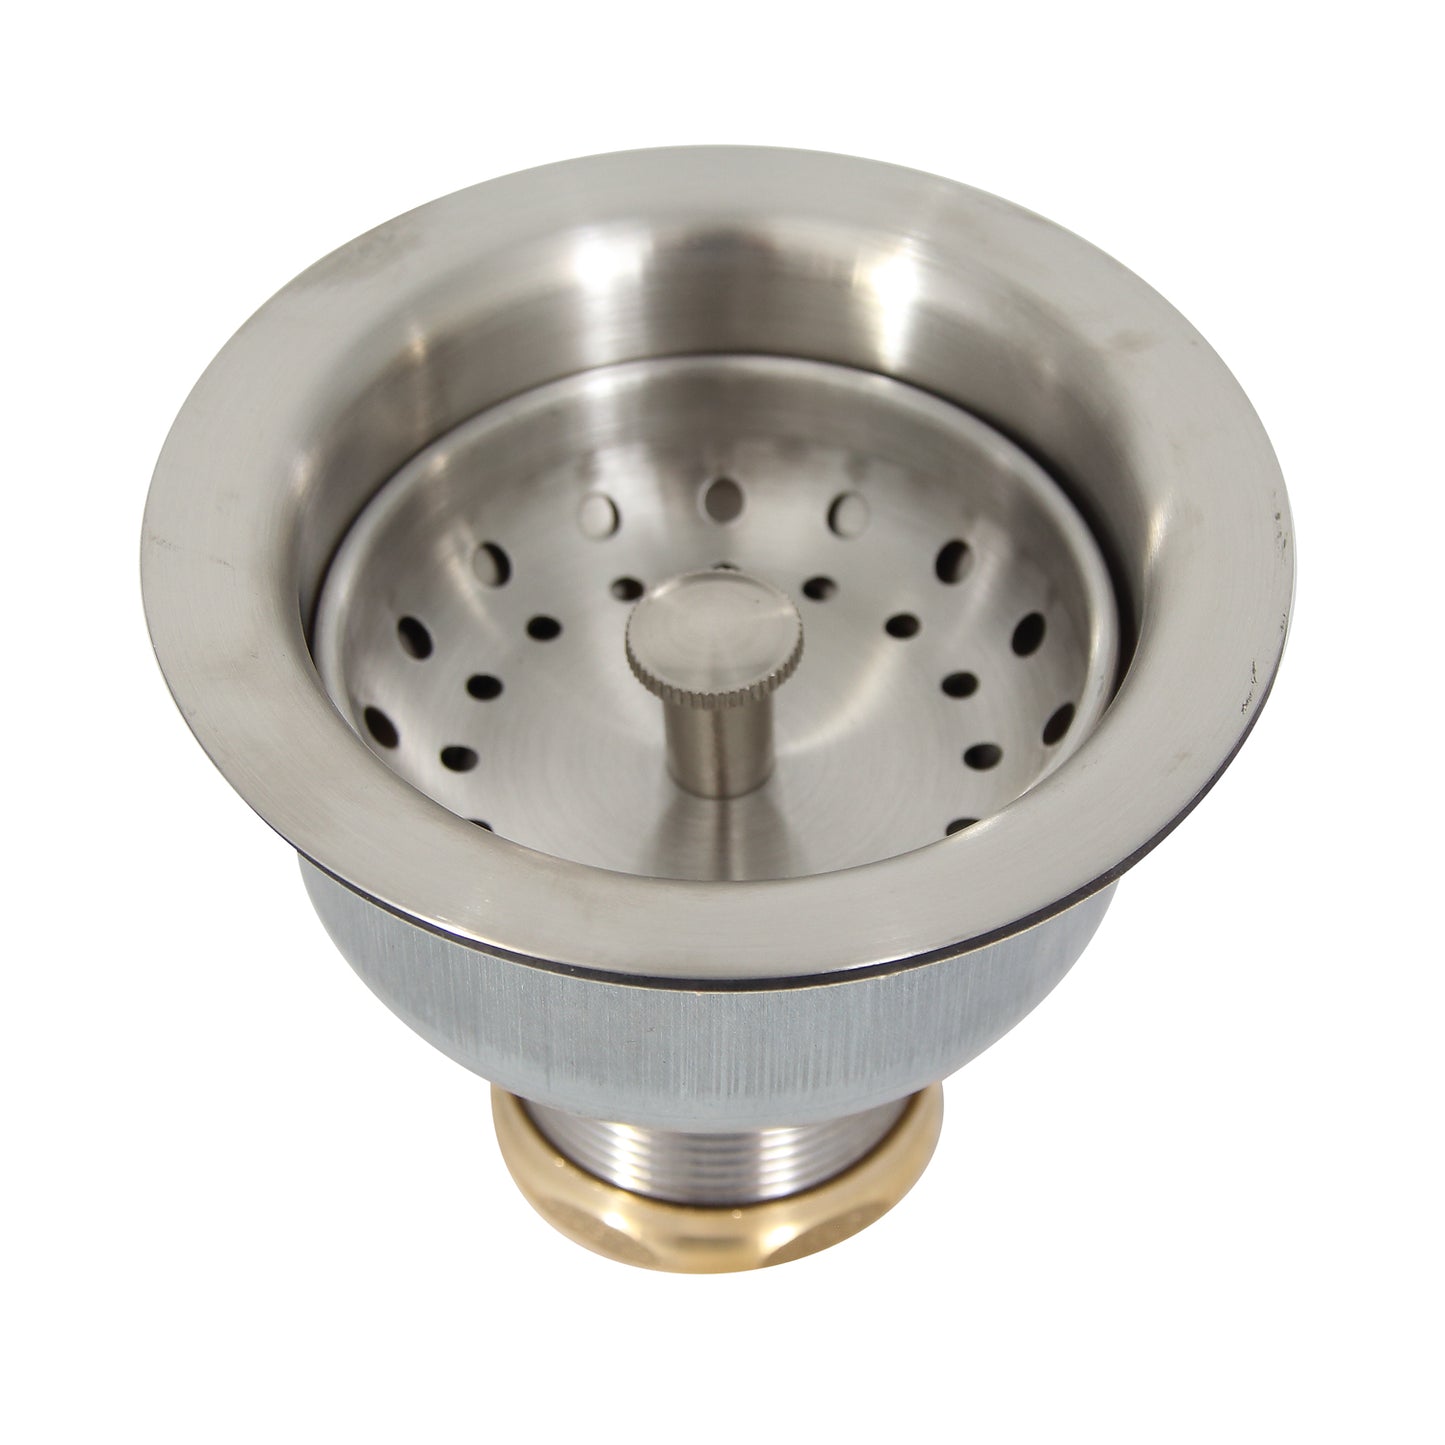 Kitchen Sink Strainer for 3-1/2" Drain with 3-1/2" Shank Polished Stainless